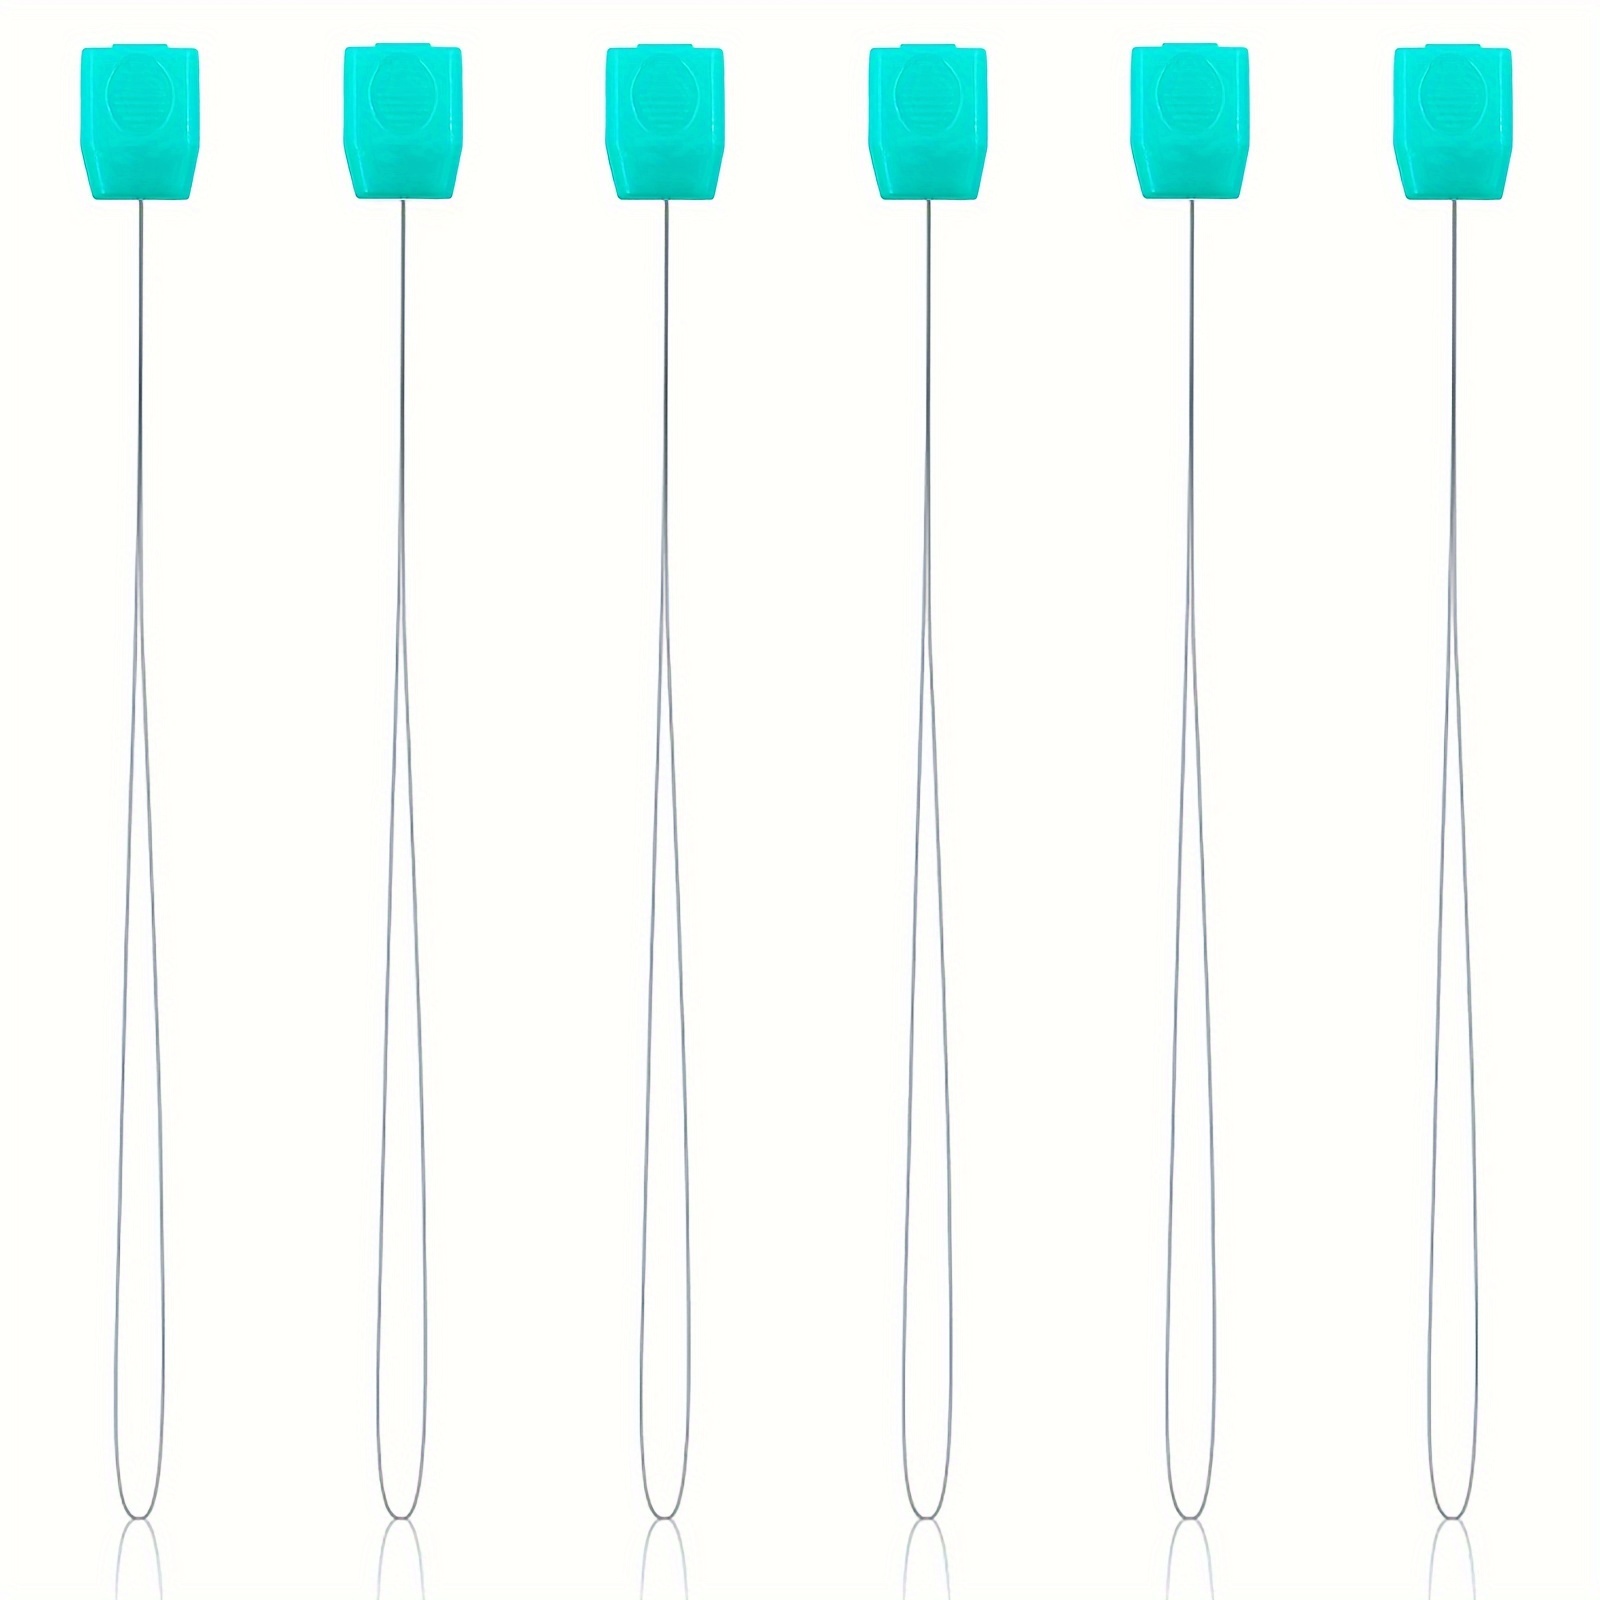 

6pcs Punch Needle Threaders, 9.8 Inches (25cm) Plastic Handles, Embroidery Stitching Tools, Suitable For 3.5mm & 5.0mm Punch Needles